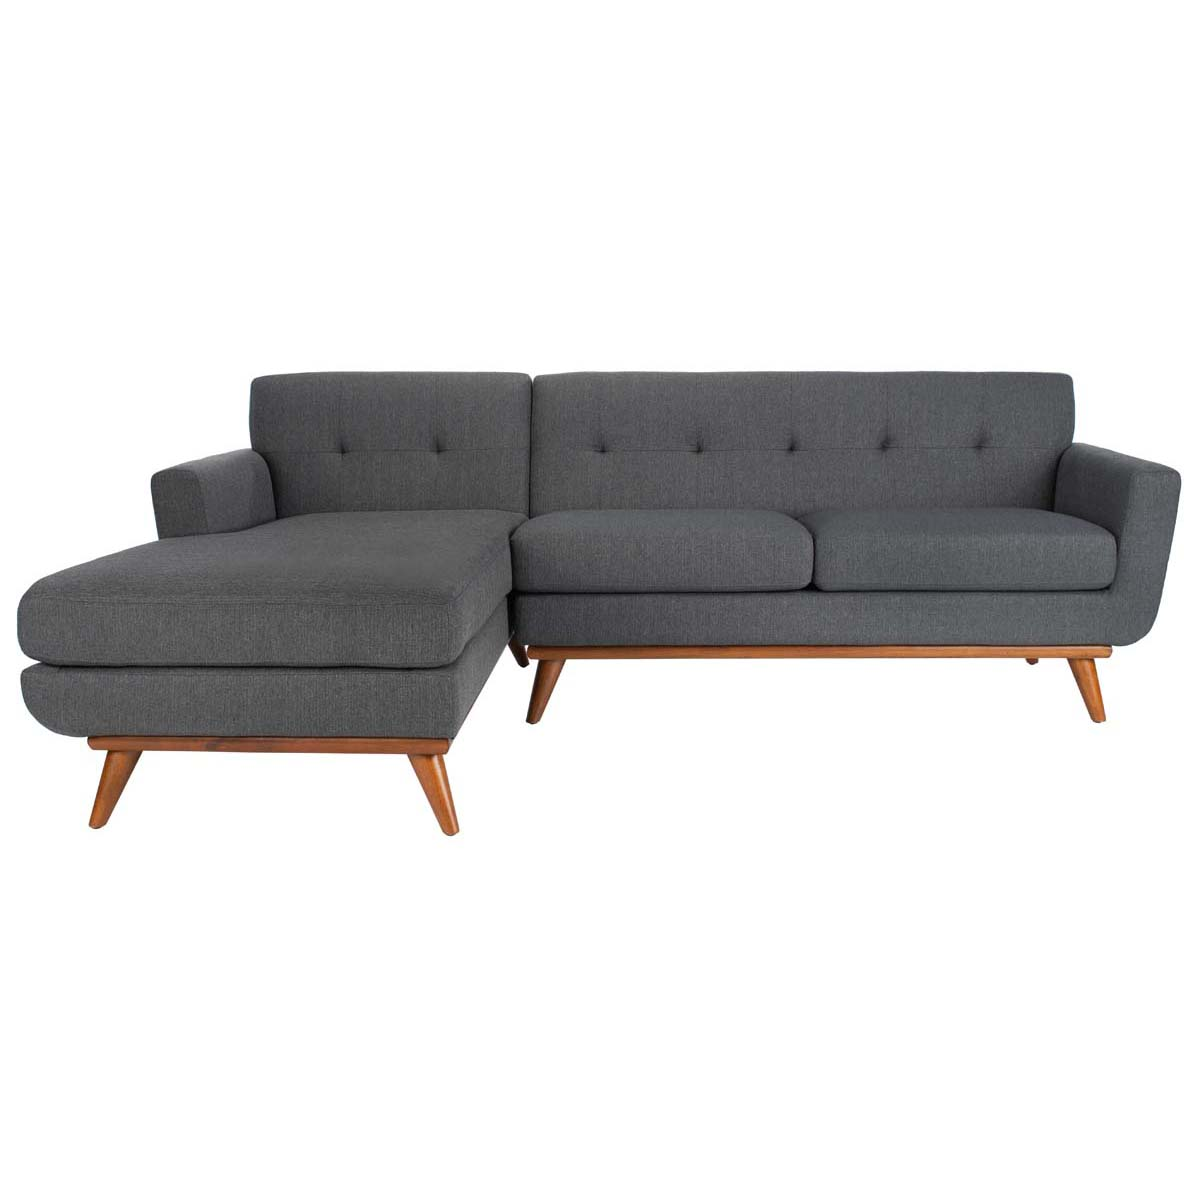 Safavieh Couture Opal Linen Tufted Sectional Sofa